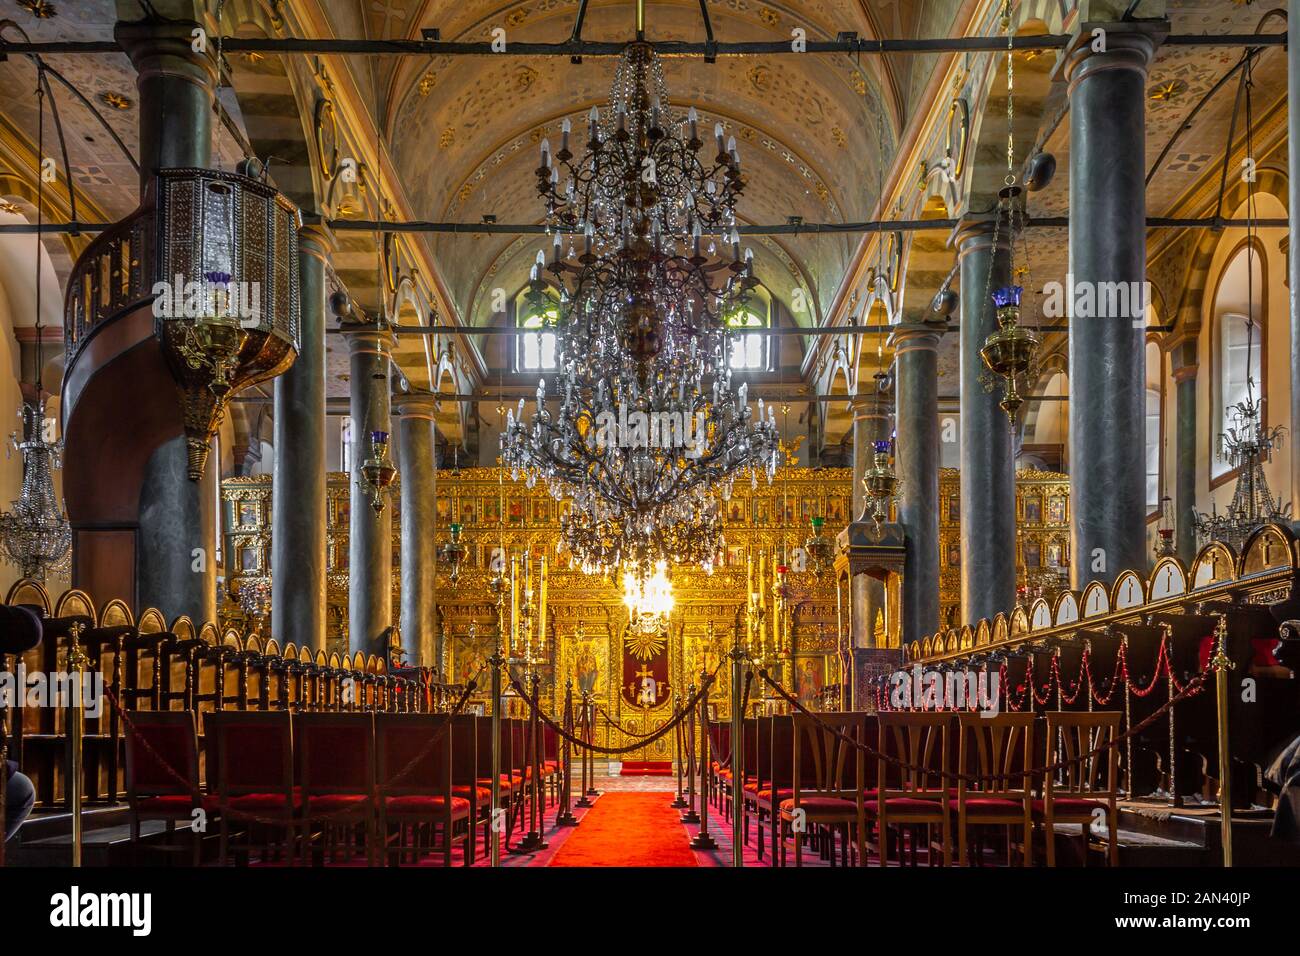 Balat, Fatih, Istanbul / Turkey - January 13 2020: The Patriarchal Church of St. George, Constantinople Ecumenical Orthodox Patriarchate interior view Stock Photo